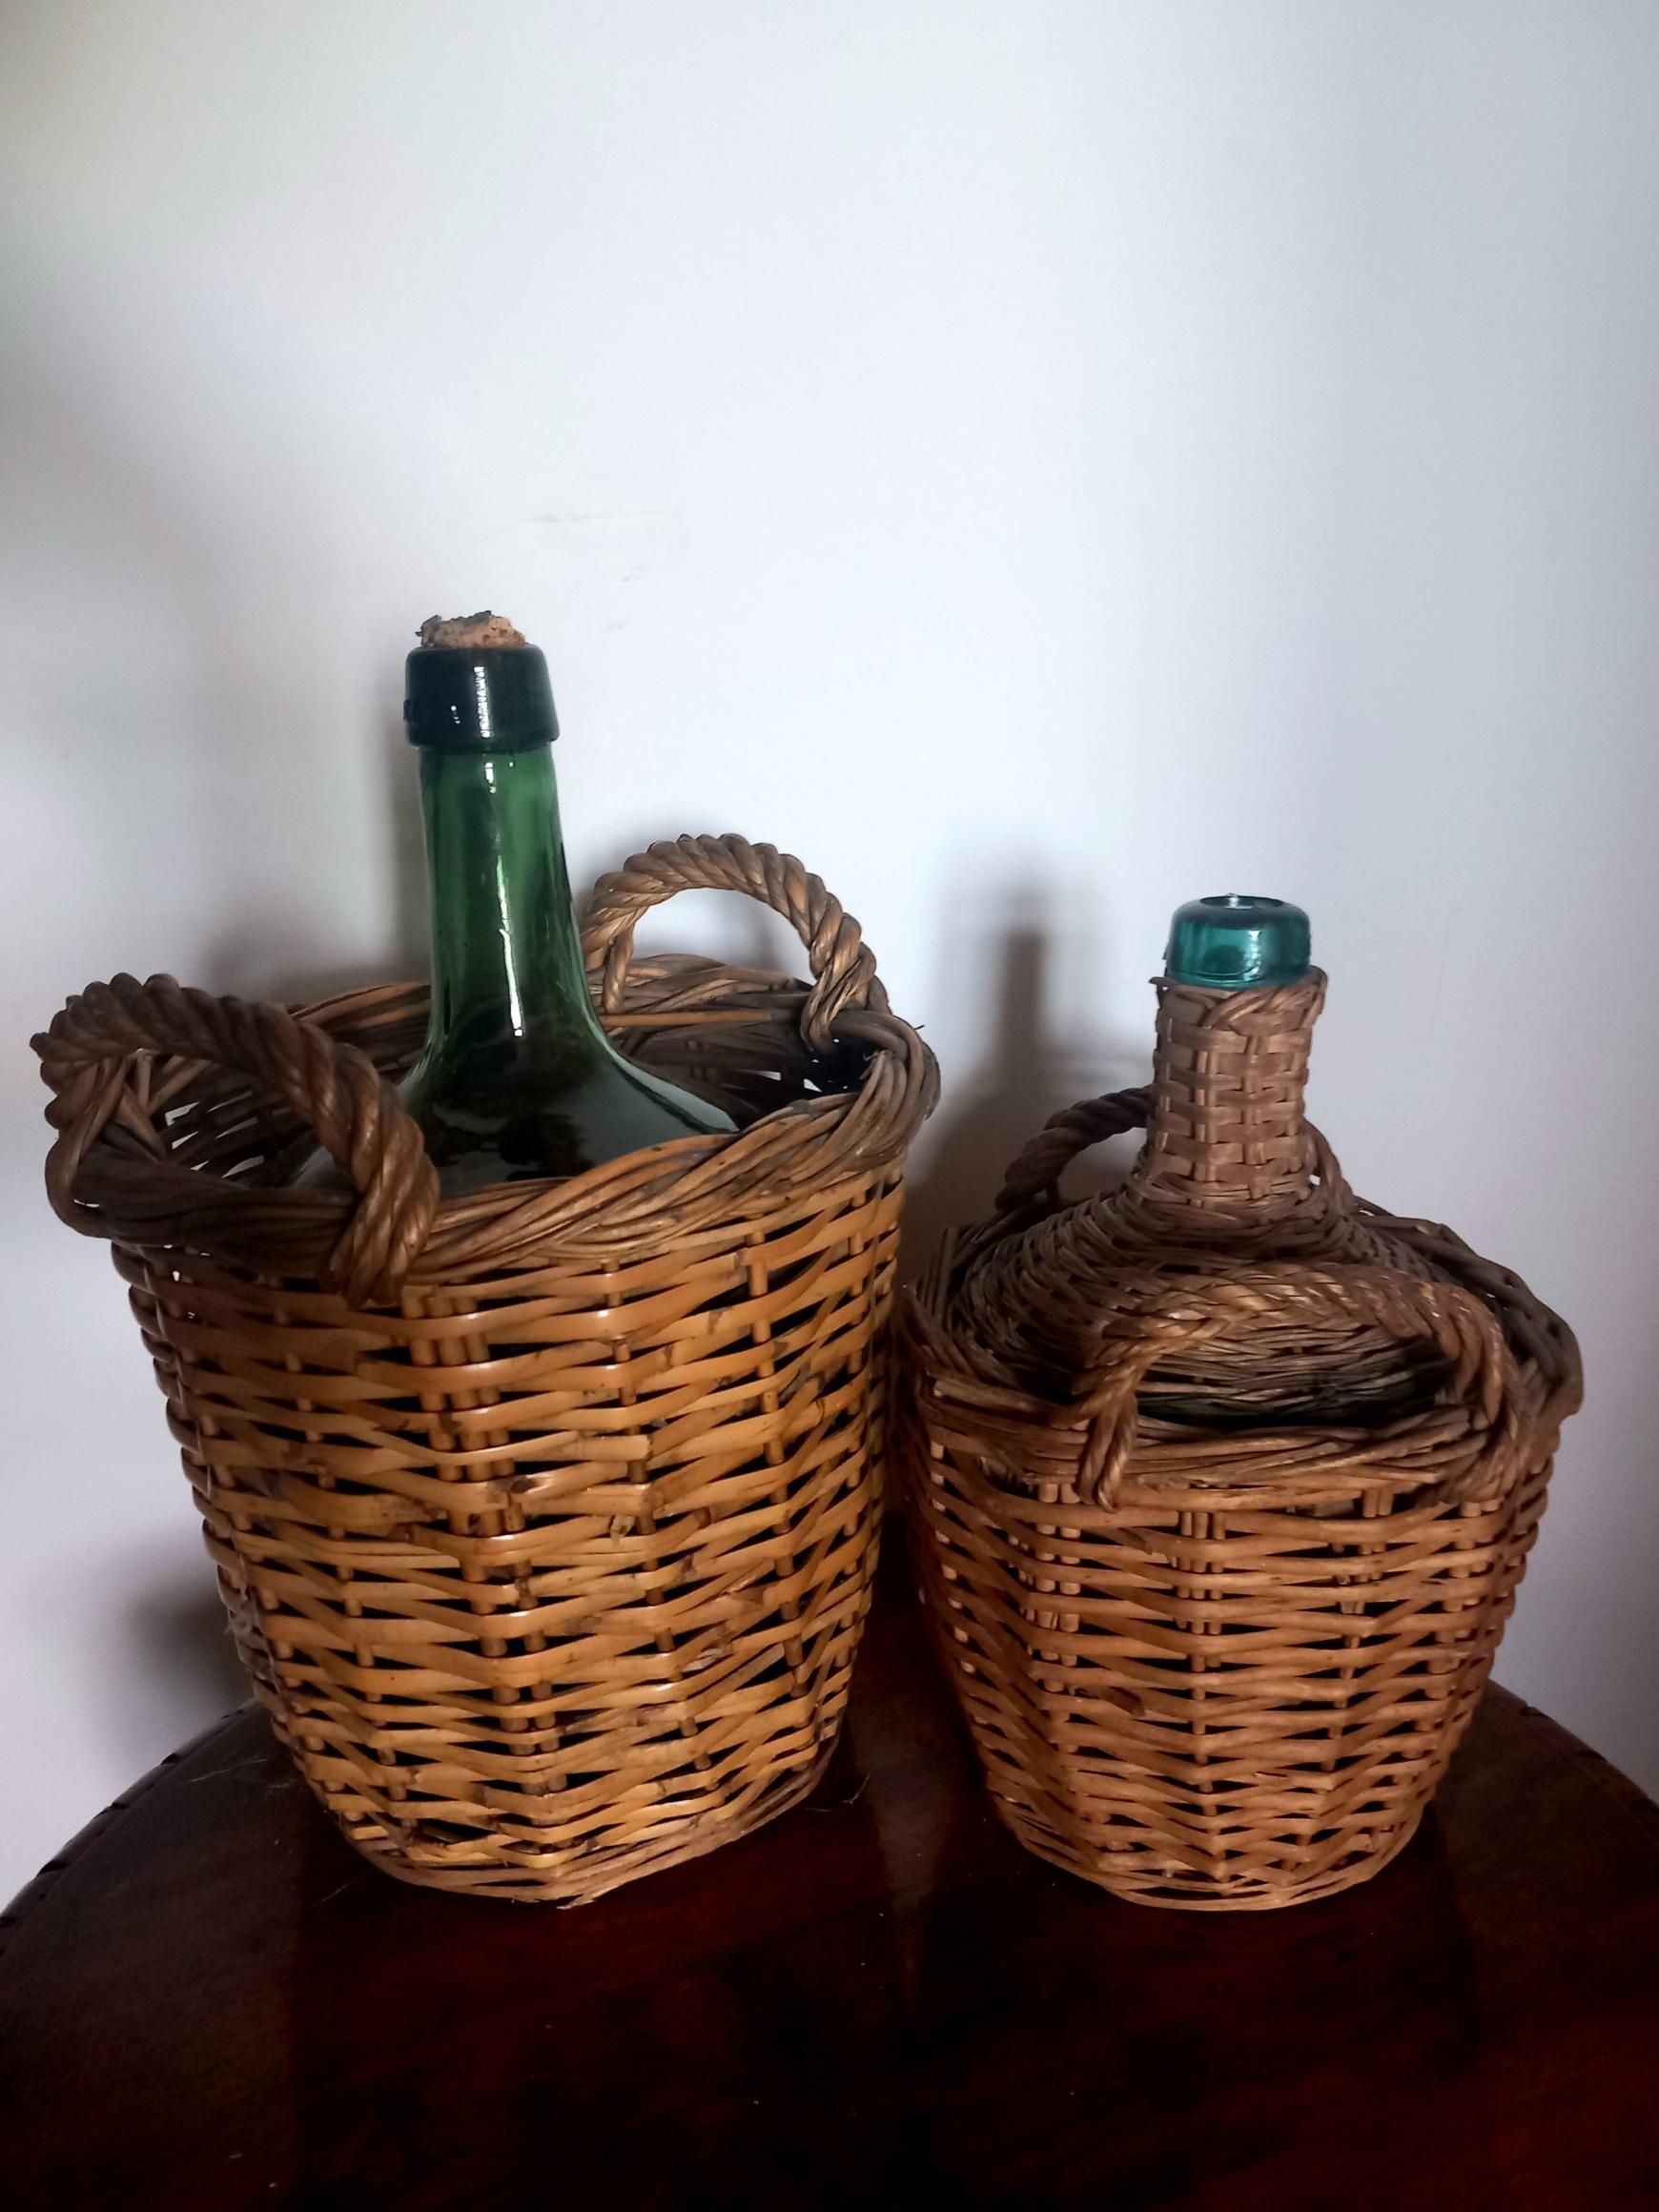 Wine bottle cooler. Glass, wicker  Spain early 20th century, 1930 or early.

24X24X38 cm
18X18X27 cm

Beautiful traditional bottles or carafes to store and especially to transport the wine from the vat of the winery to the home or place of